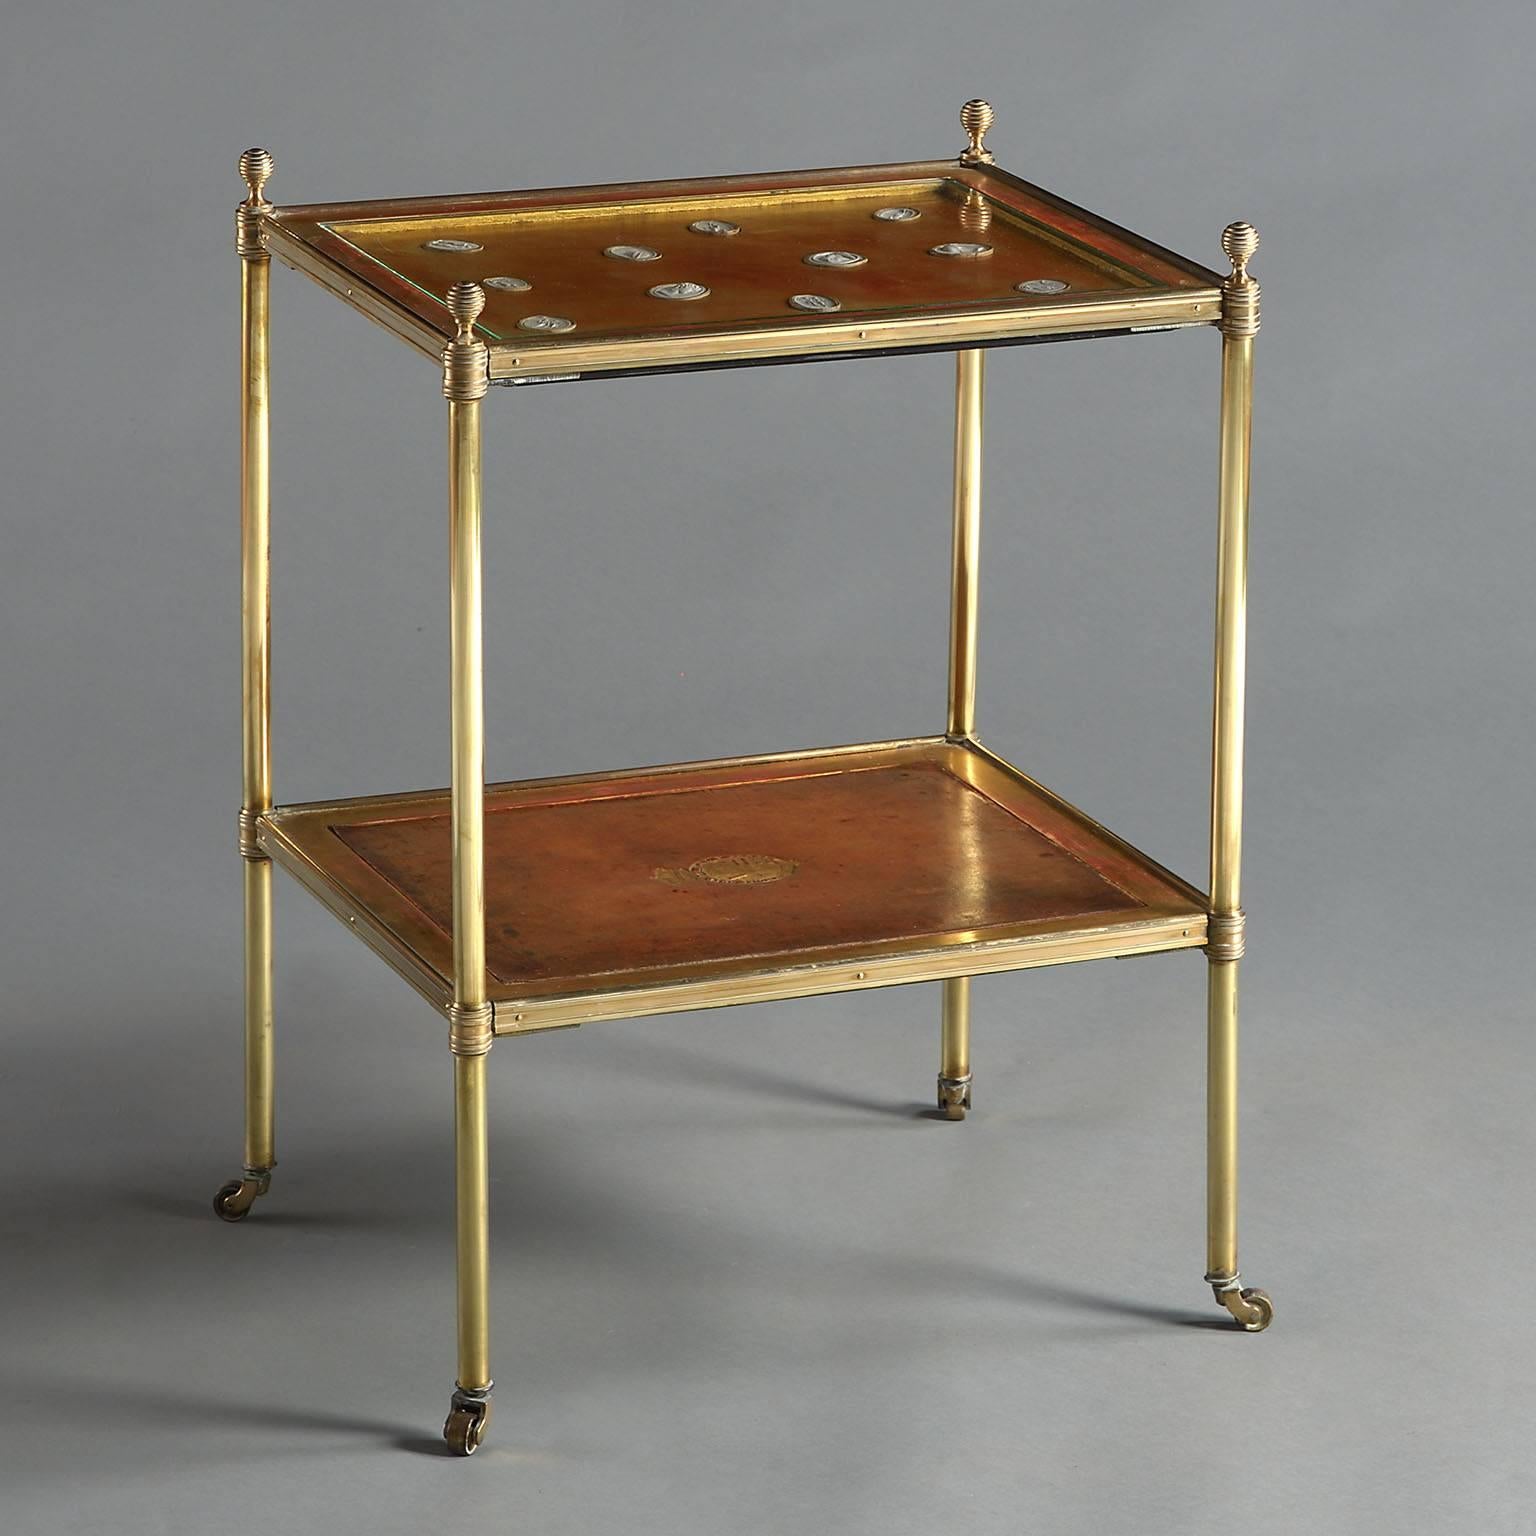 A fine pair of mid-20th century two-tier brass tables with gilded borders inset with leather panels and miniature intaglios. 

By Mallett of London.